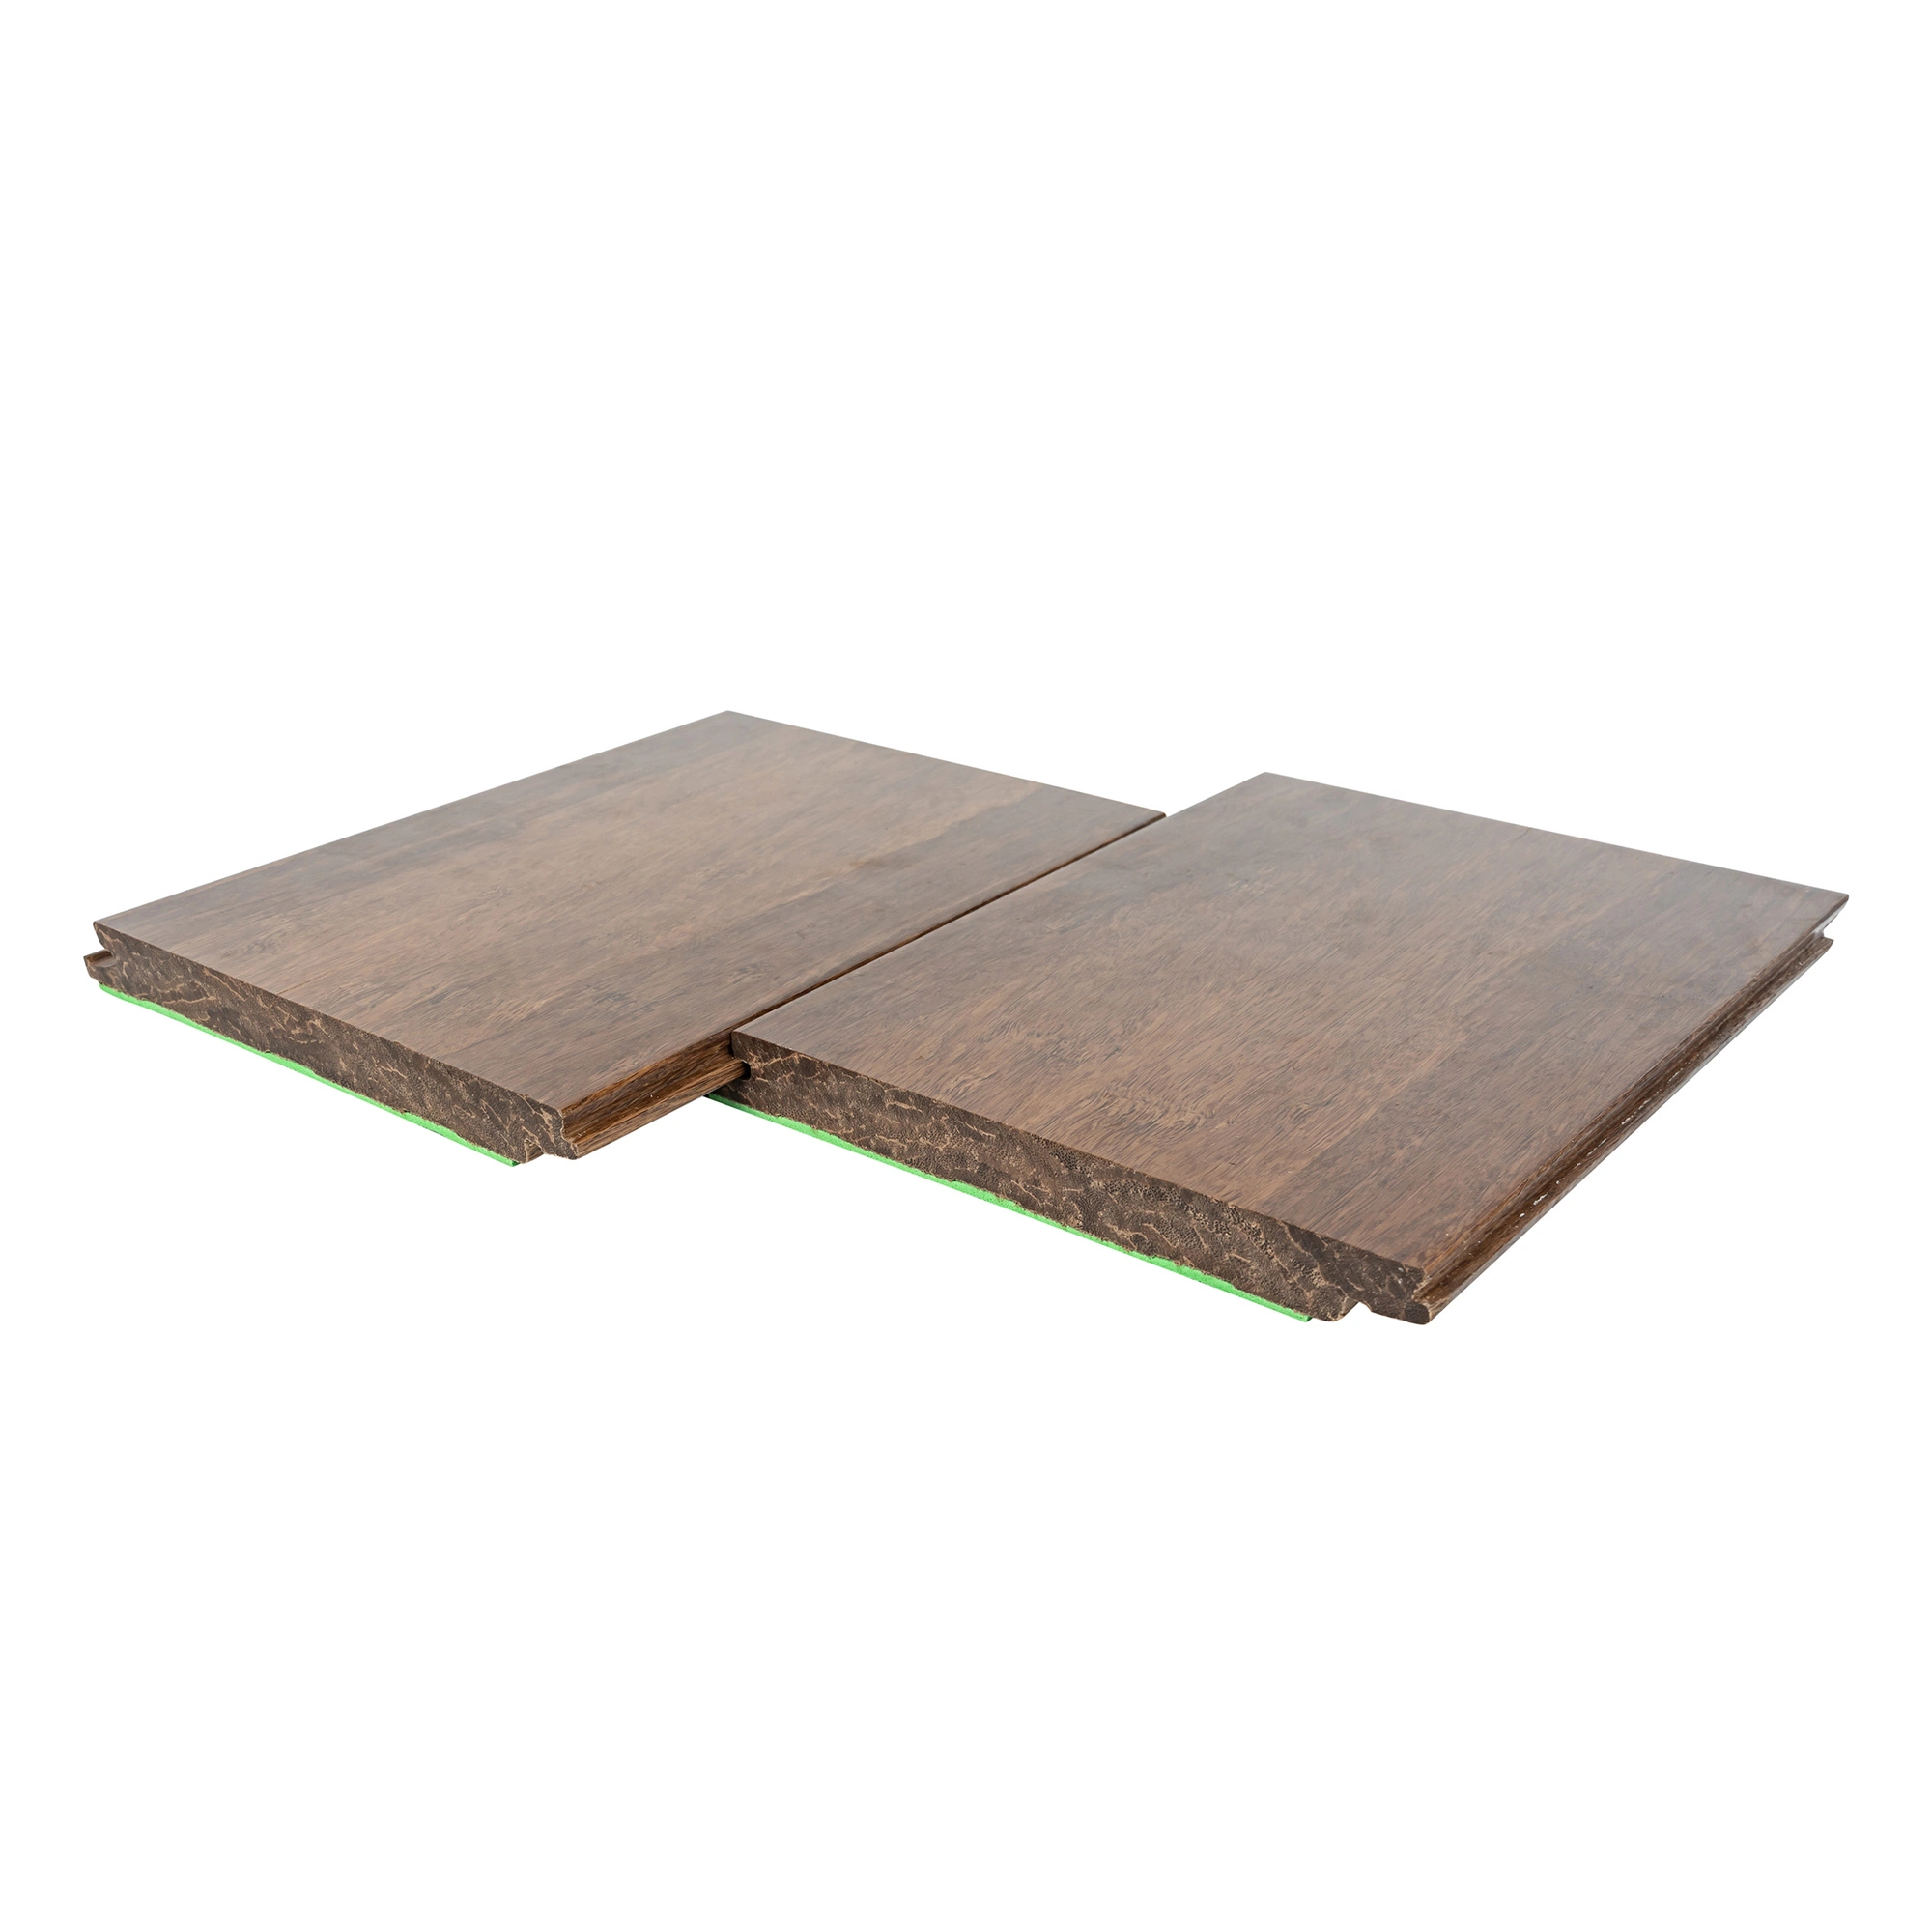 Eco-Friendly E0 Wholesale/Suppliers Bamboo Flooring Supplier&Manufacturer Soundproof Home Decoration Indoor Bamboo Floor/Flooring